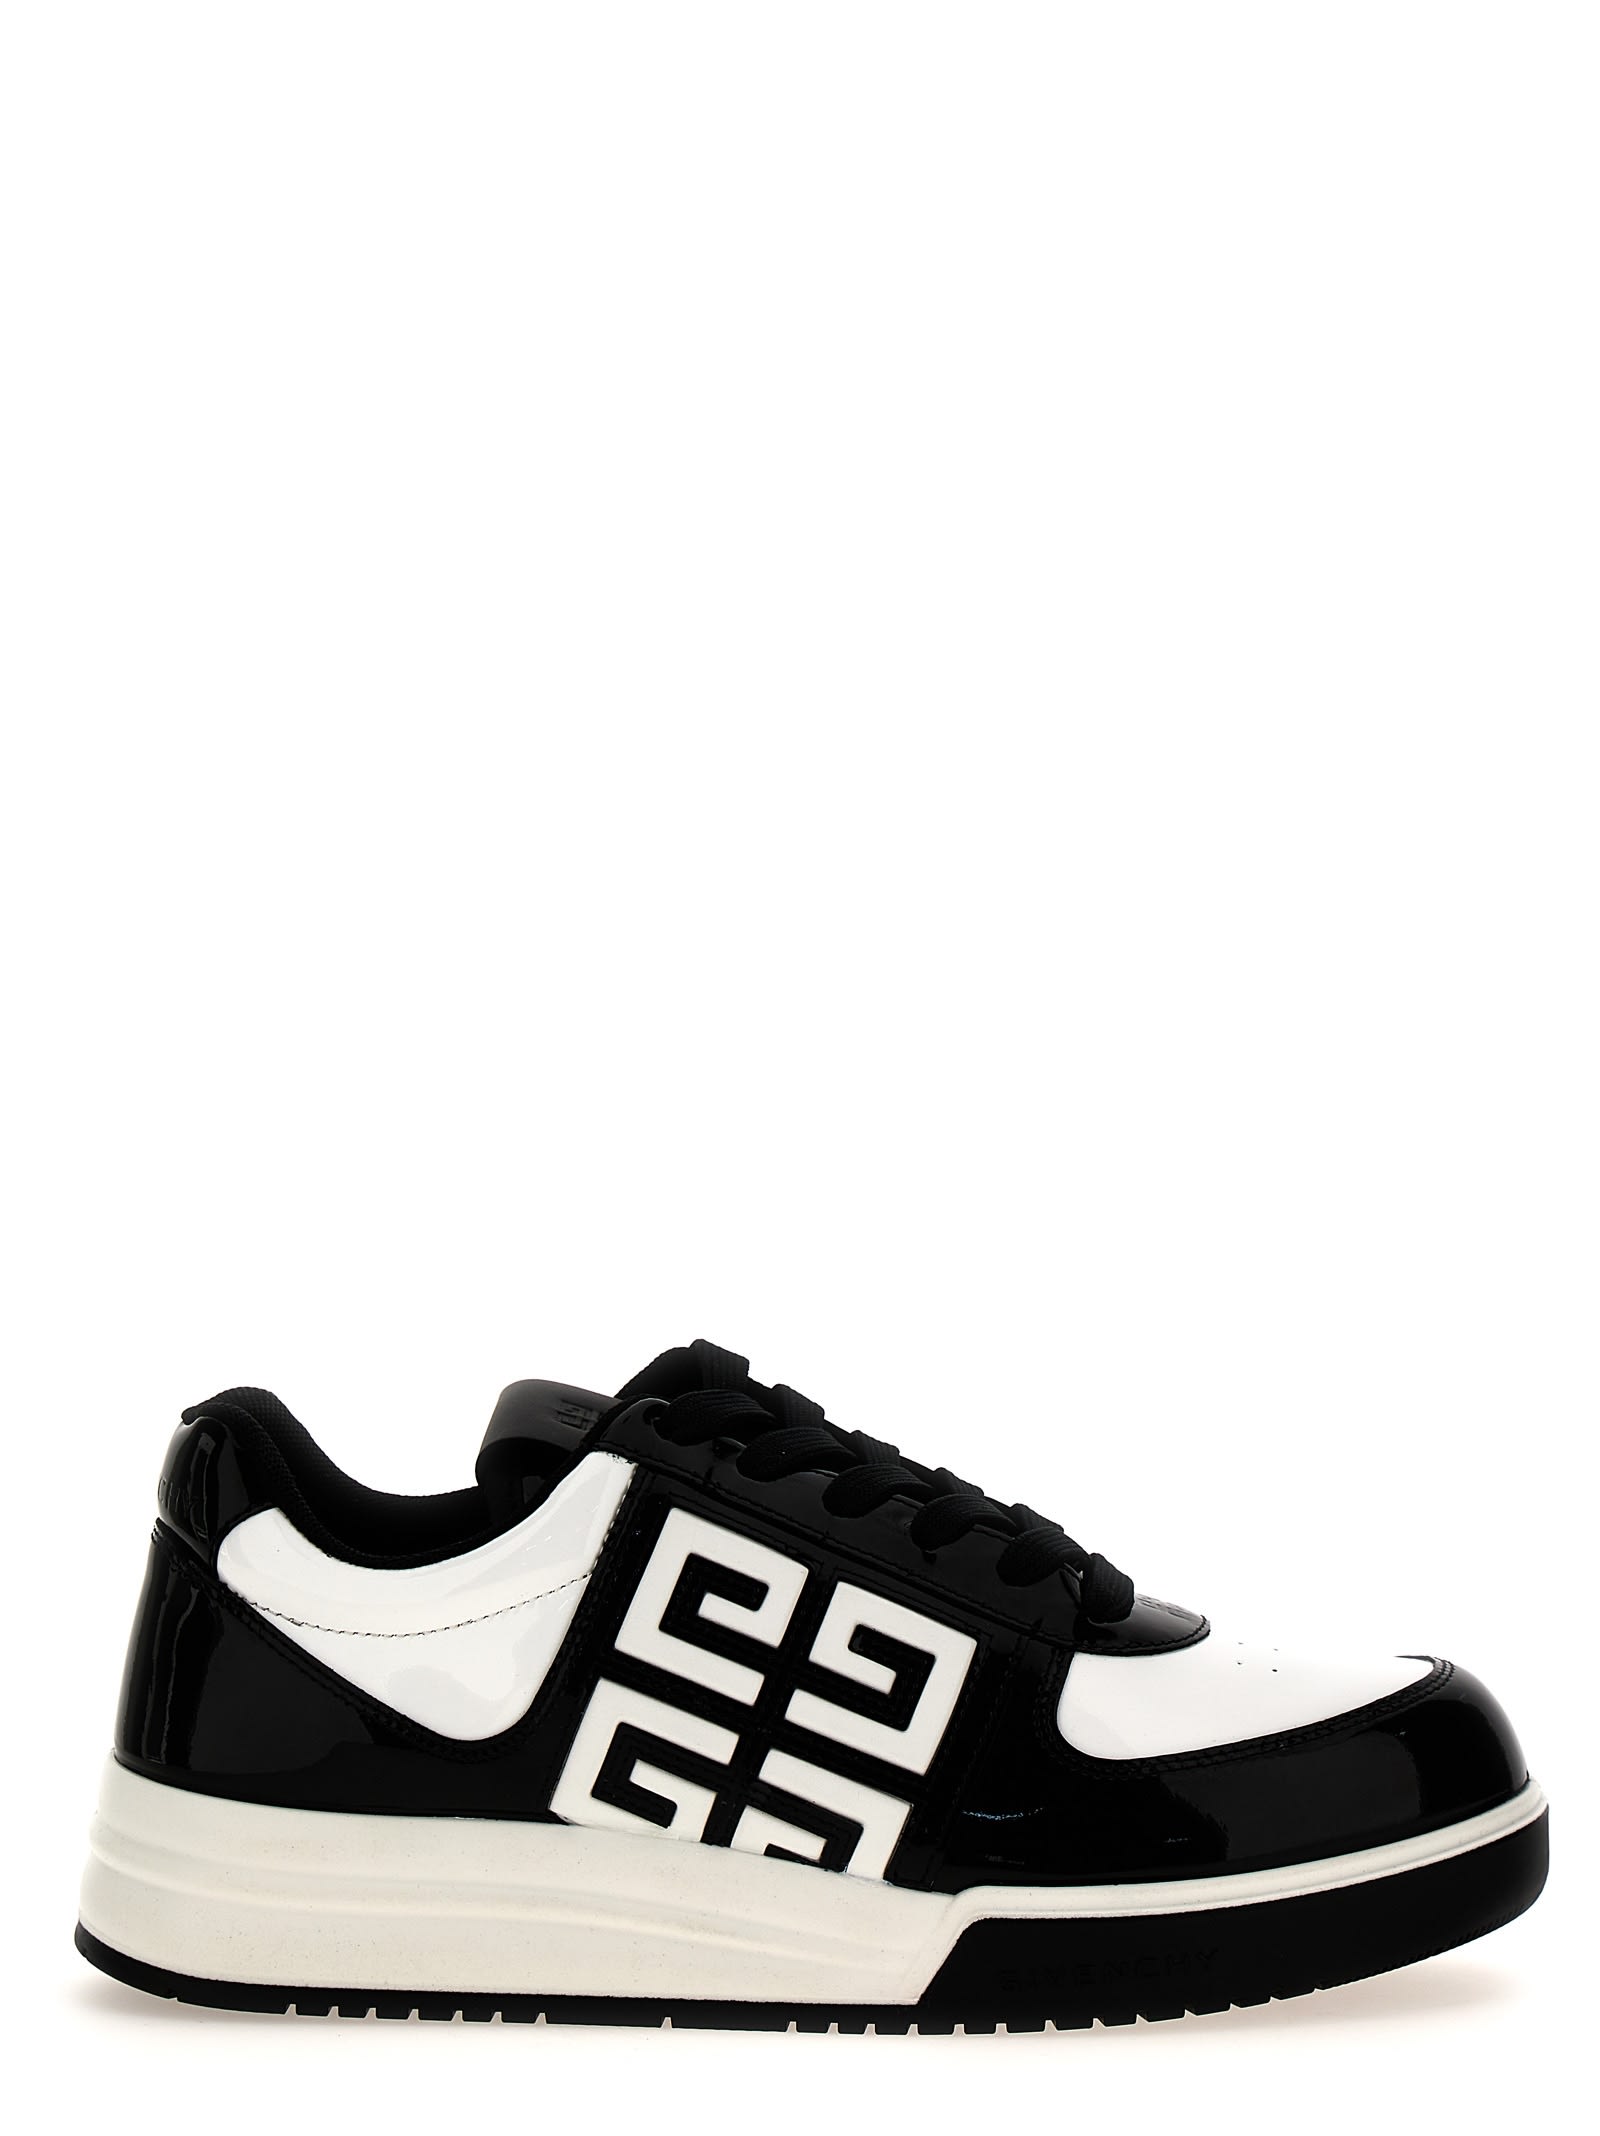 GIVENCHY WHITE/BLACK PATENT LEATHER G4 SNEAKERS